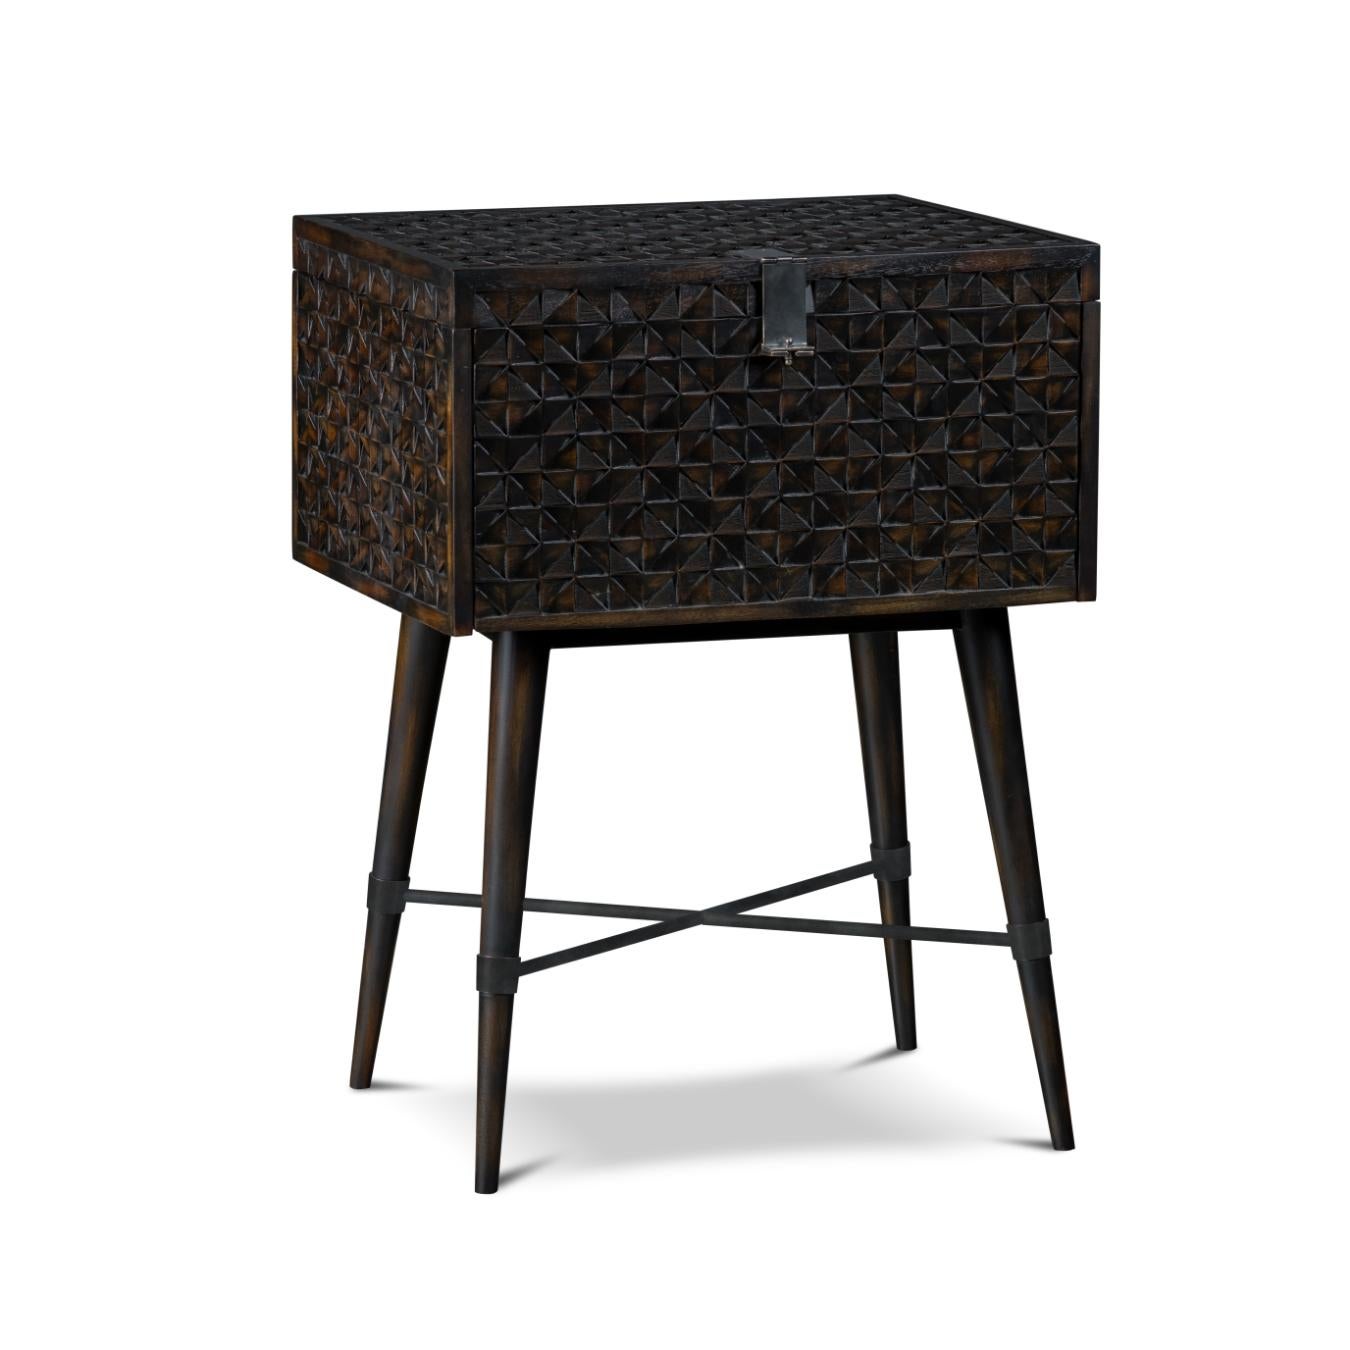 Inspired by 50's Danish design, the Arlov auxiliary table blends classic design with exceptional craftsmanship. With its triangular geometric pattern and ironwork details, it is sure to make a statement. This box-shaped piece can also be opened to